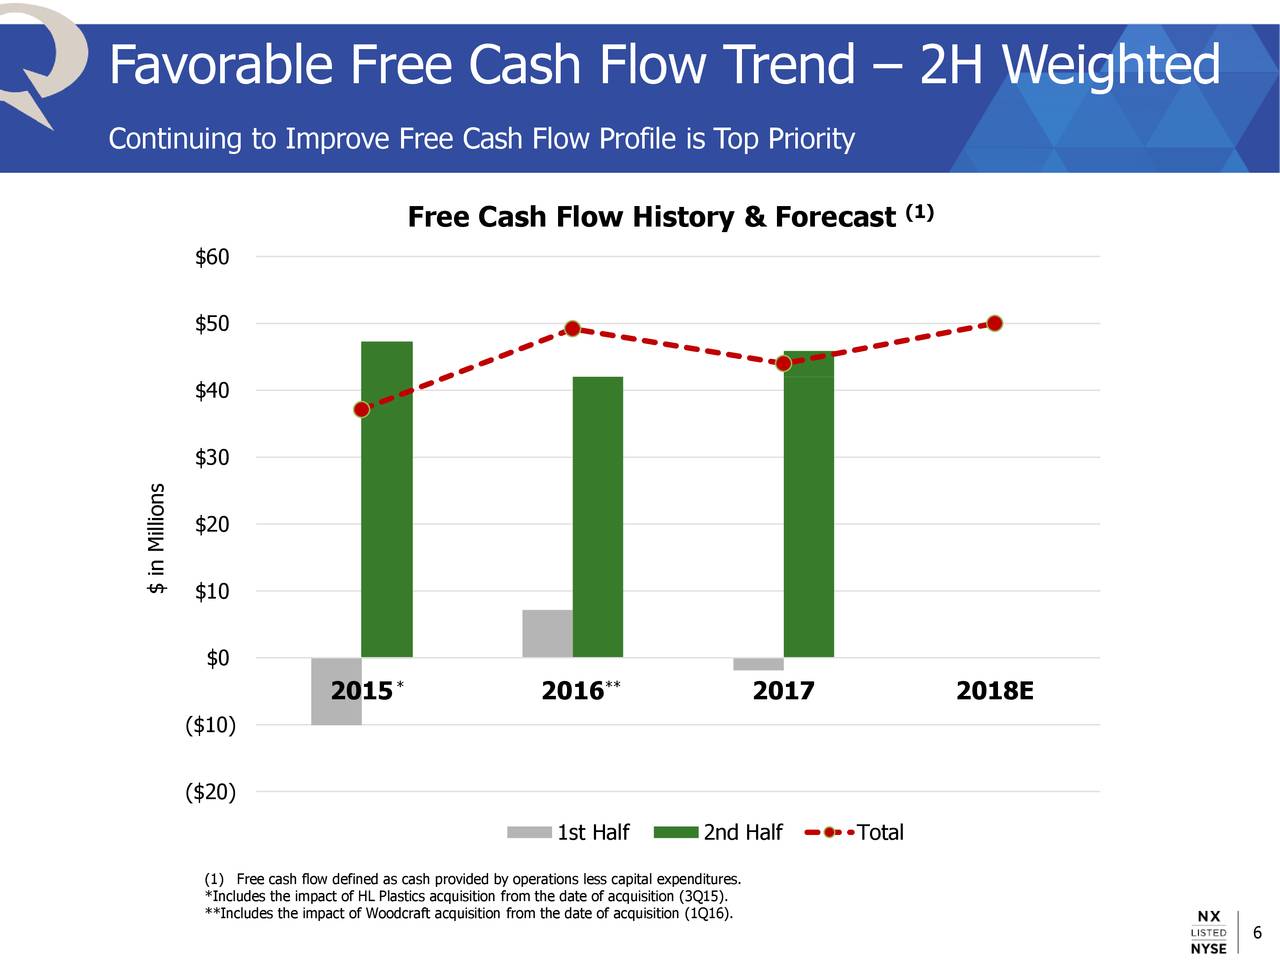 Favorable Free Cash Flow Trend – 2H Weighted